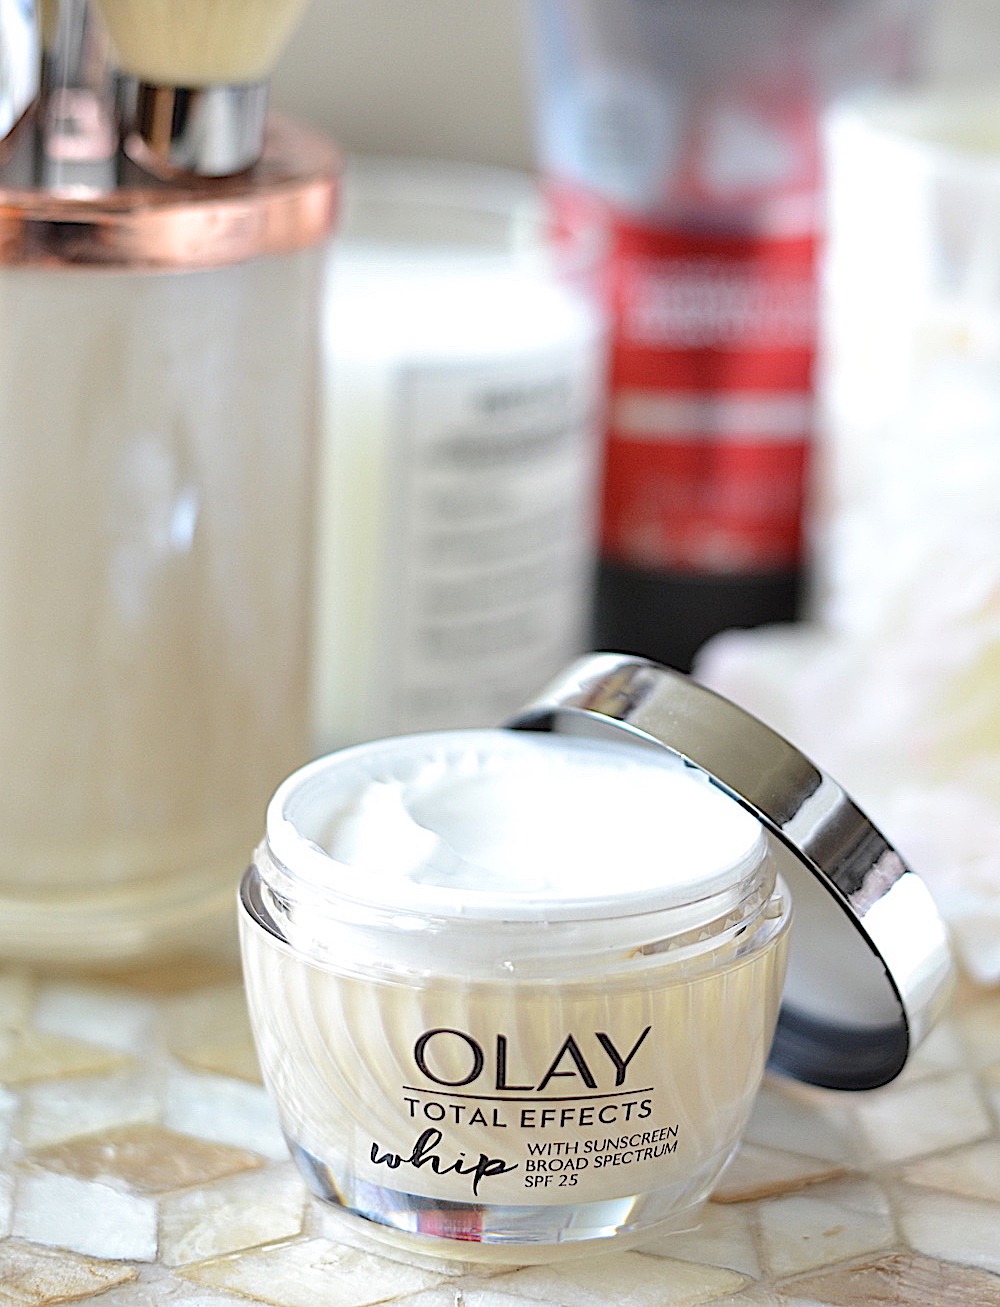  A shine-free moisturizer that also doubles as a primer? Yes, please! Olay Total Effects Whip Face Moisturizer SPF 25 